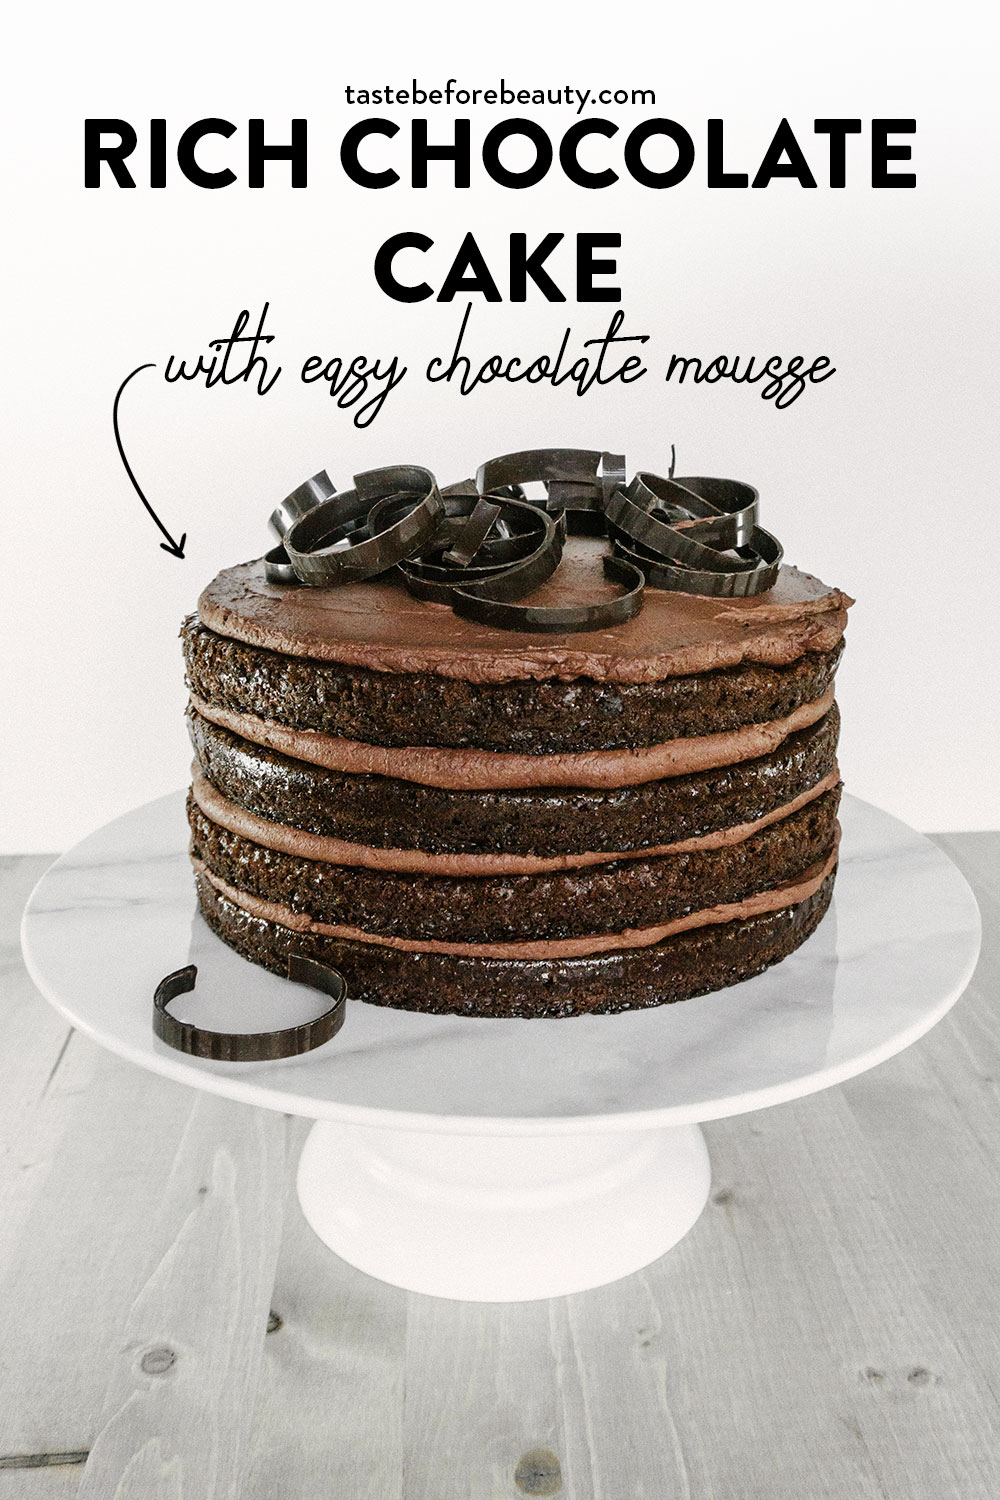 taste before beauty rich chocolate cake with easy chocolate mousse on stand with chocolate swirls pinterest pin